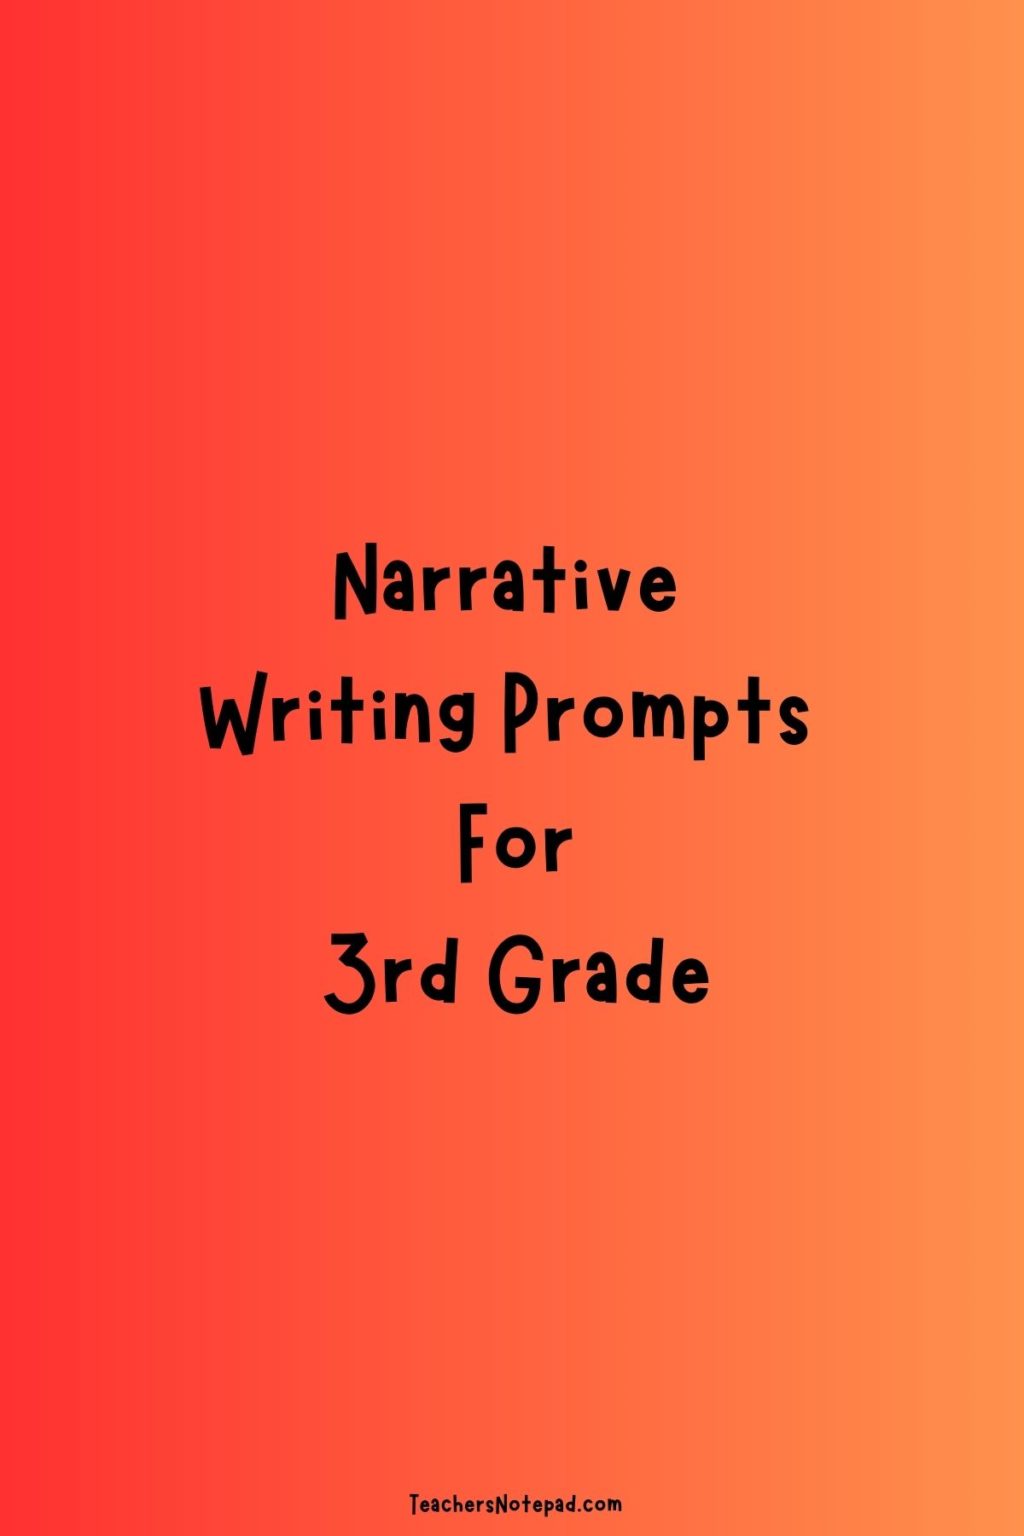 55-narrative-writing-prompts-for-3rd-grade-teacher-s-notepad